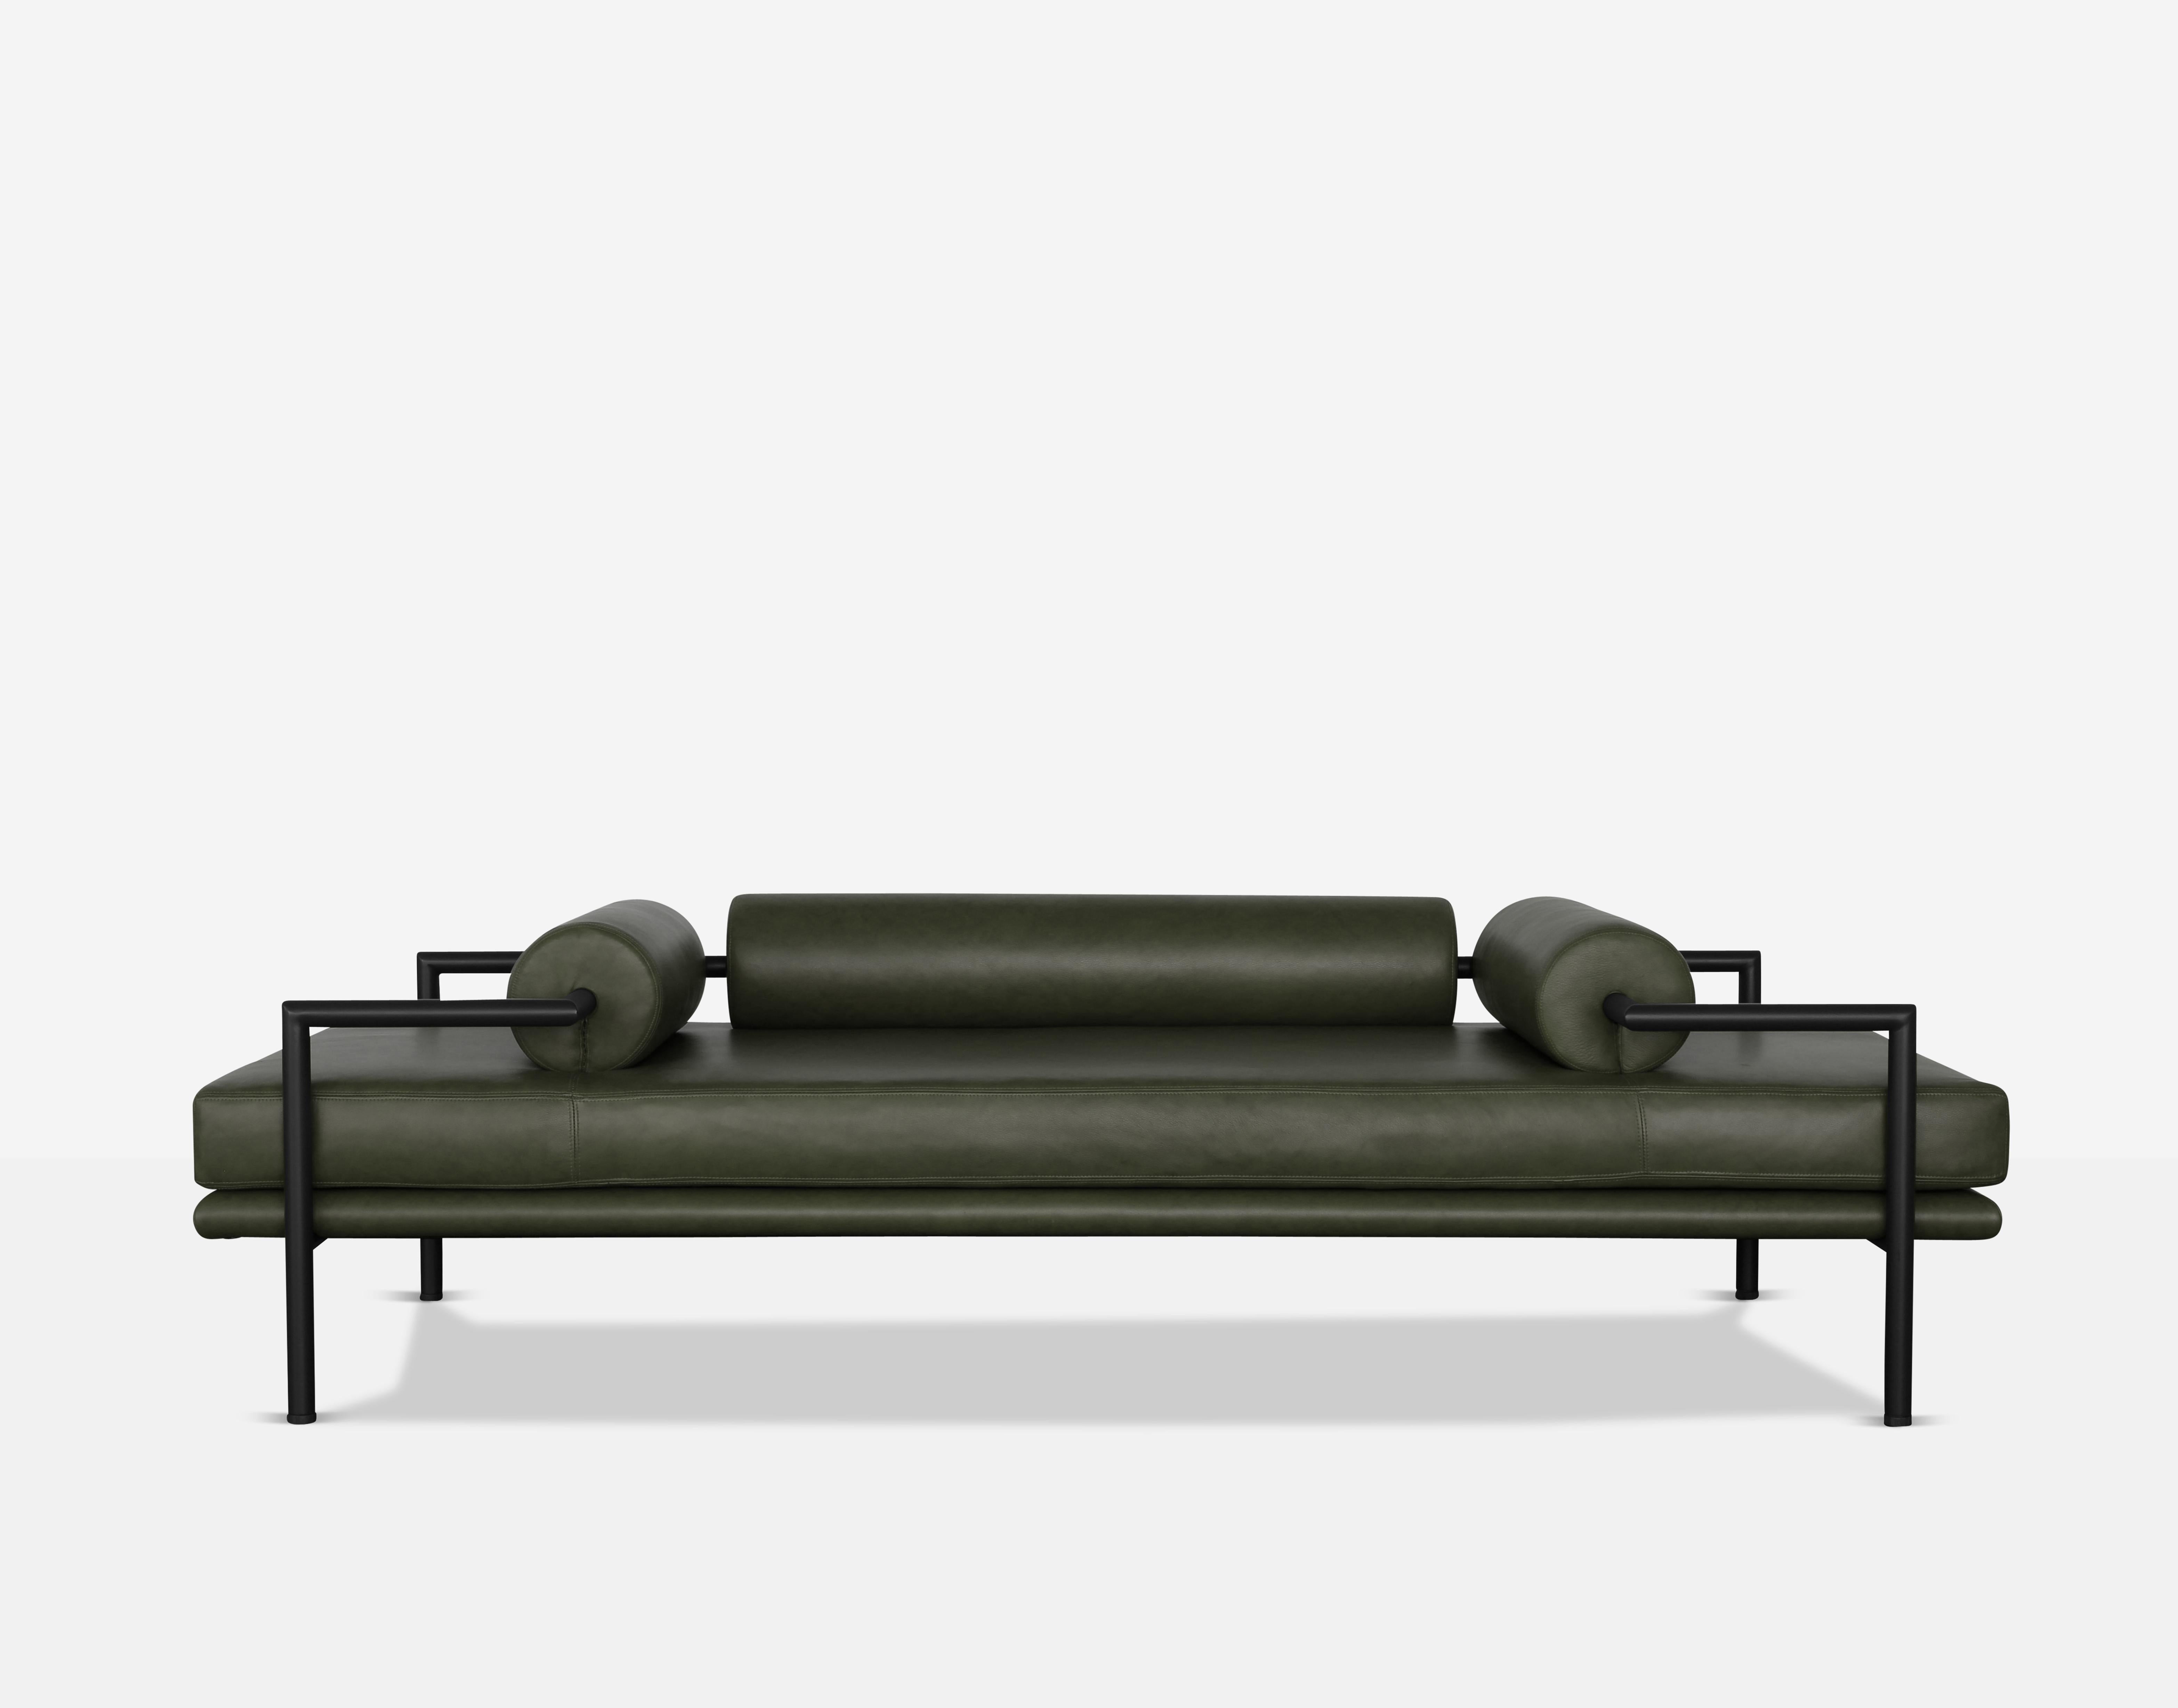 Mexican Green Leather Contemporary Daybed with Matte Black Frame by Luteca